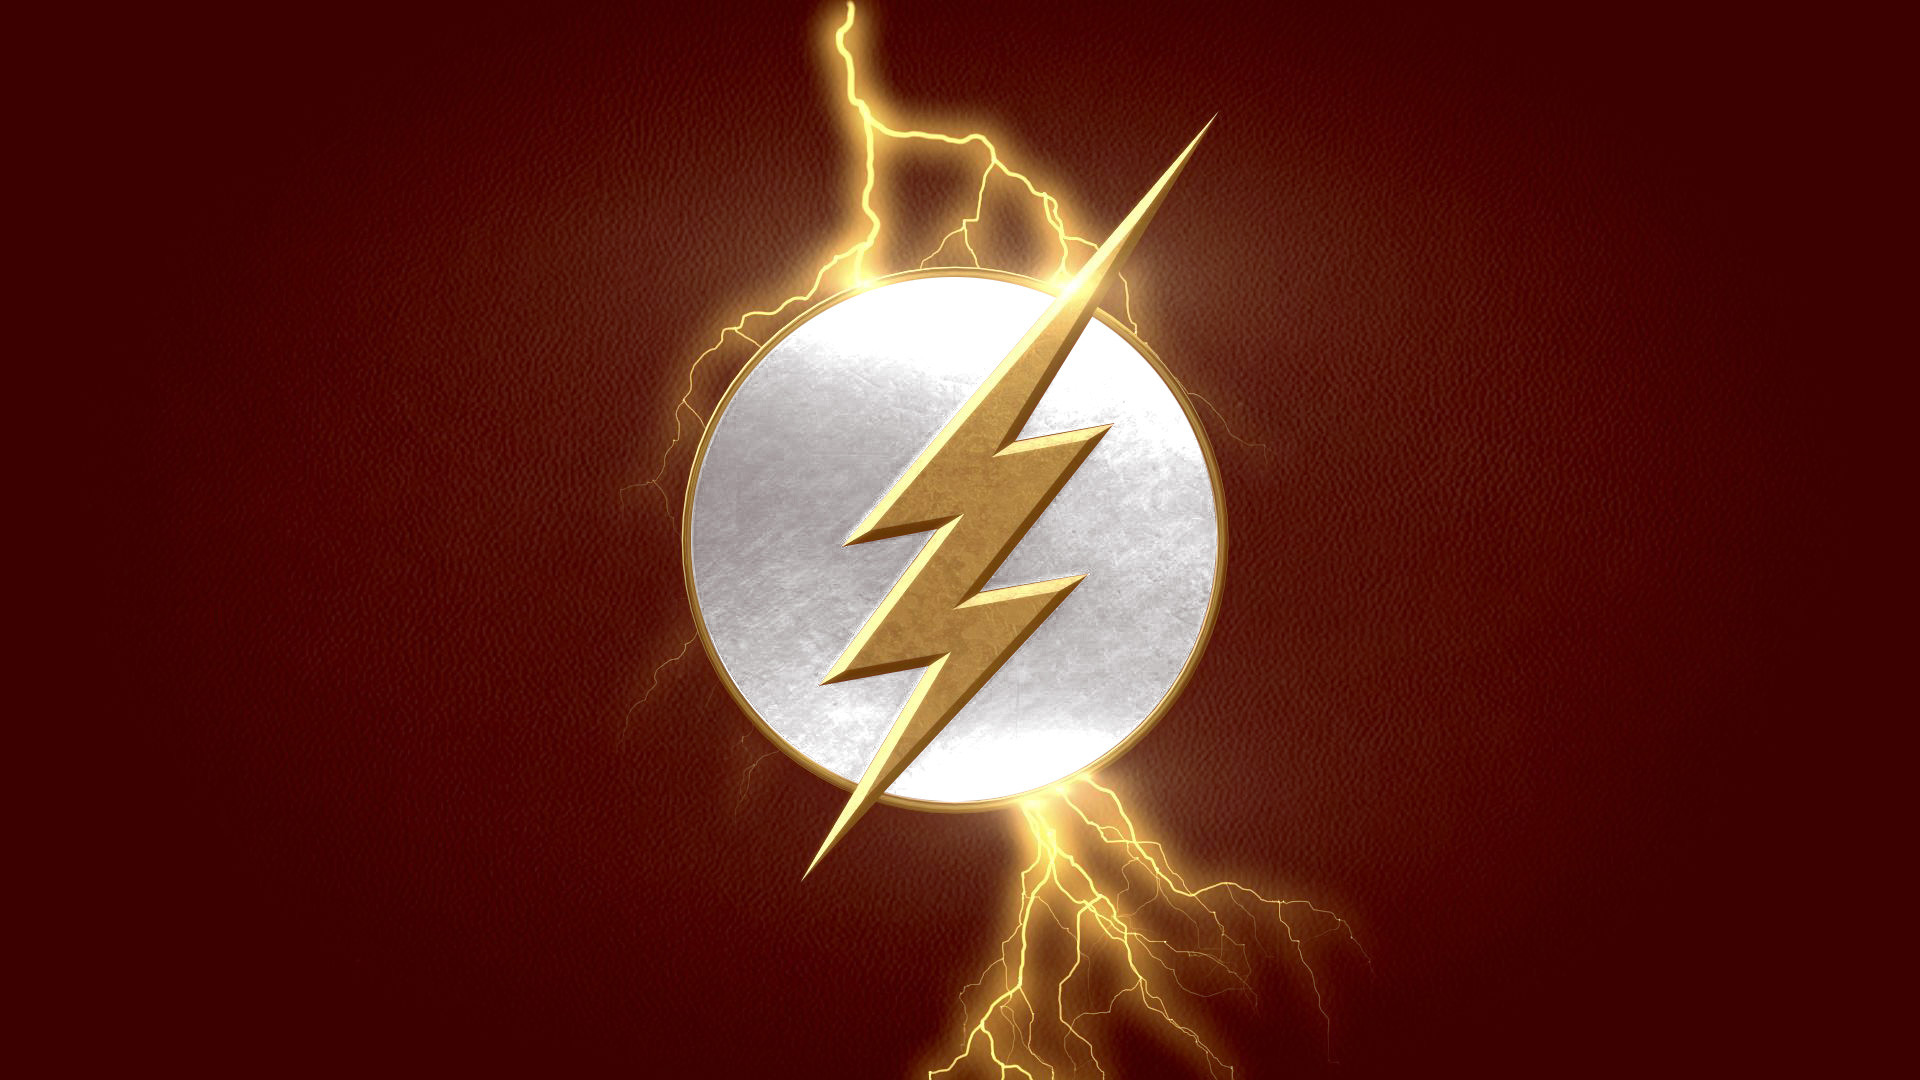 User Bigrockdj Posted An Awesome Flash Logo Wallpaper To R Dcics